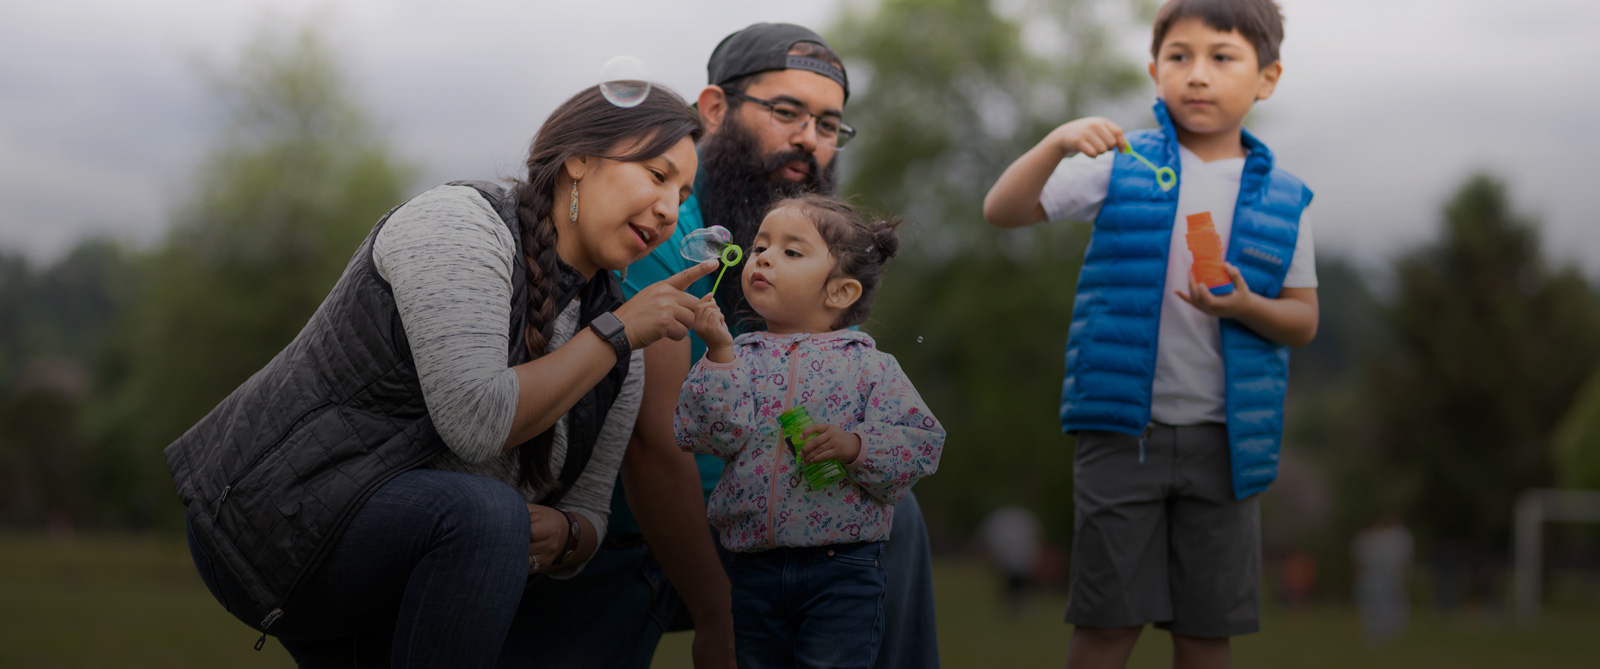 Native American community: a family enjoys the day outdoors, blowing bubbles.